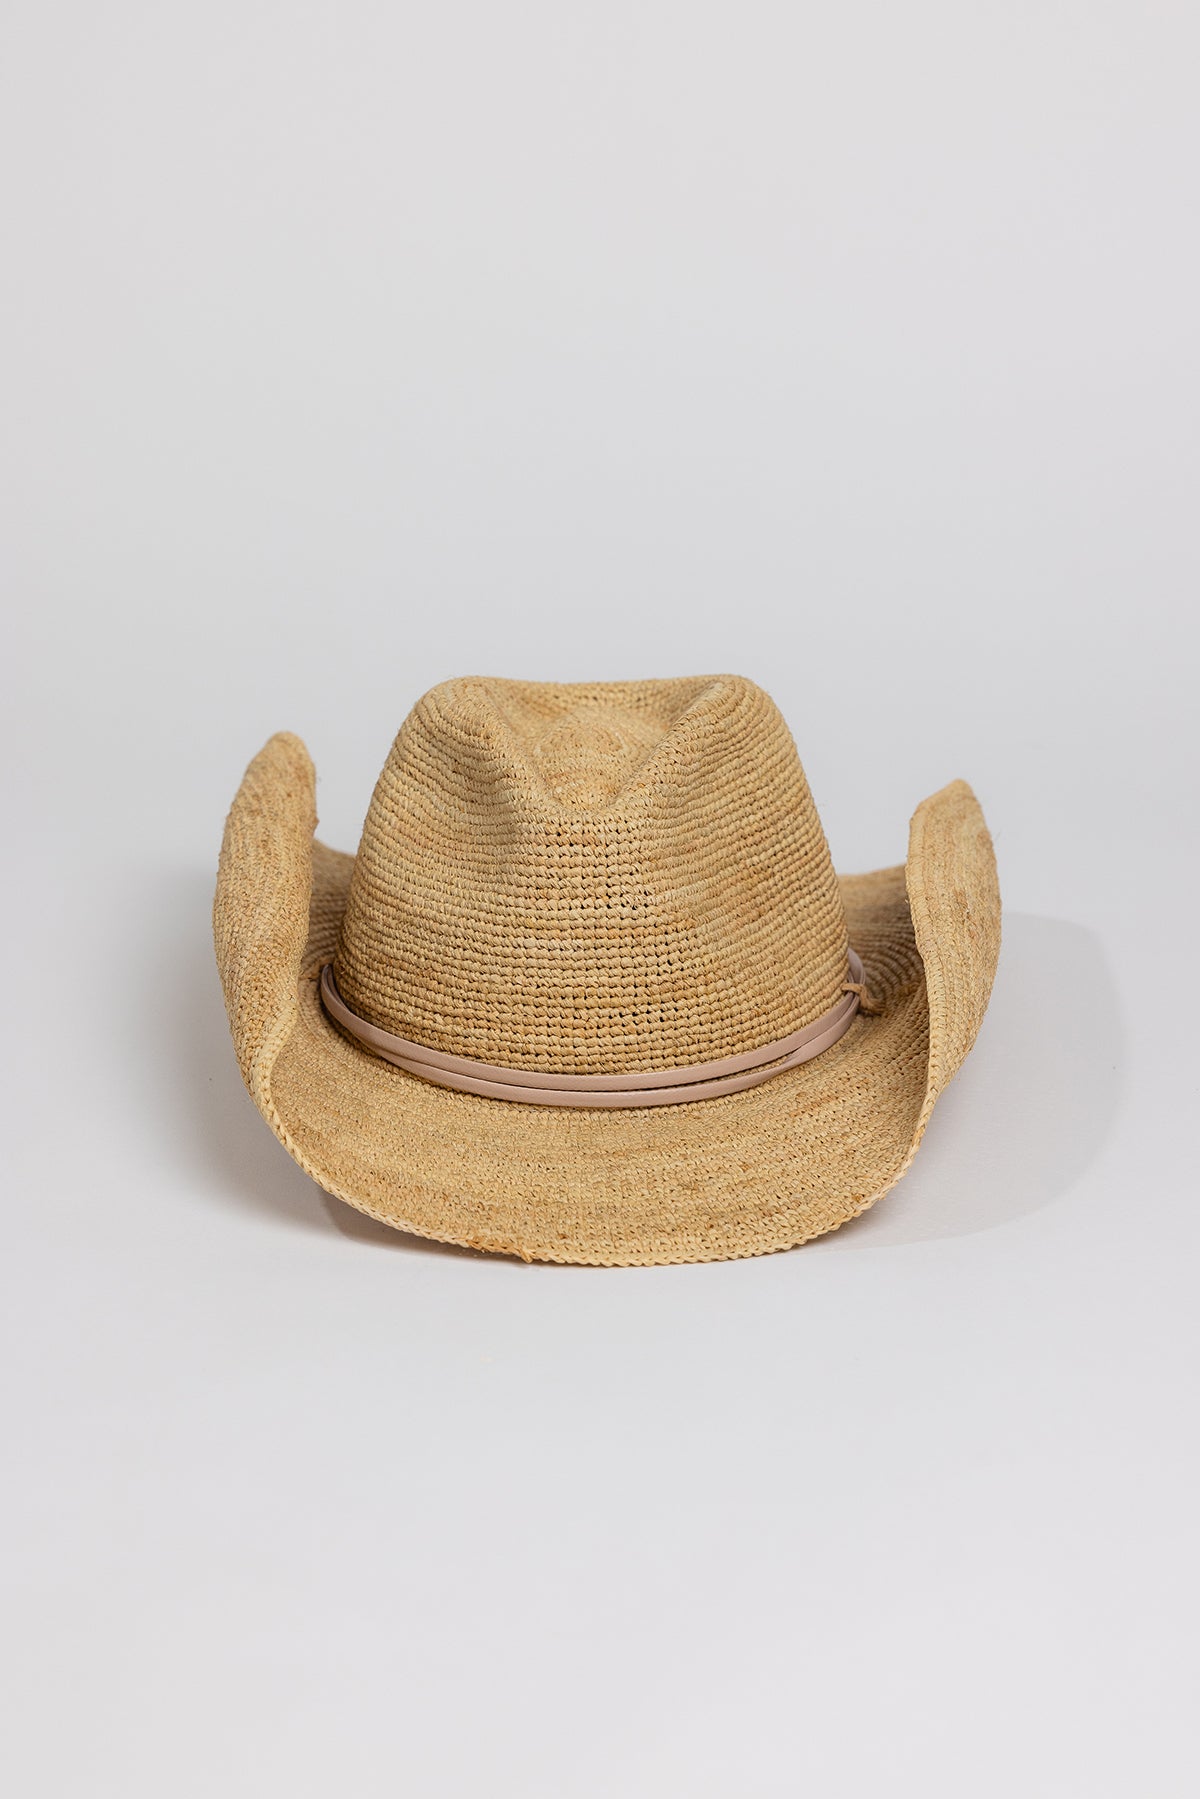 A RAFFIA CROCHET COWBOY HAT with western charm on a white background, by Velvet by Graham & Spencer.-26047821217985